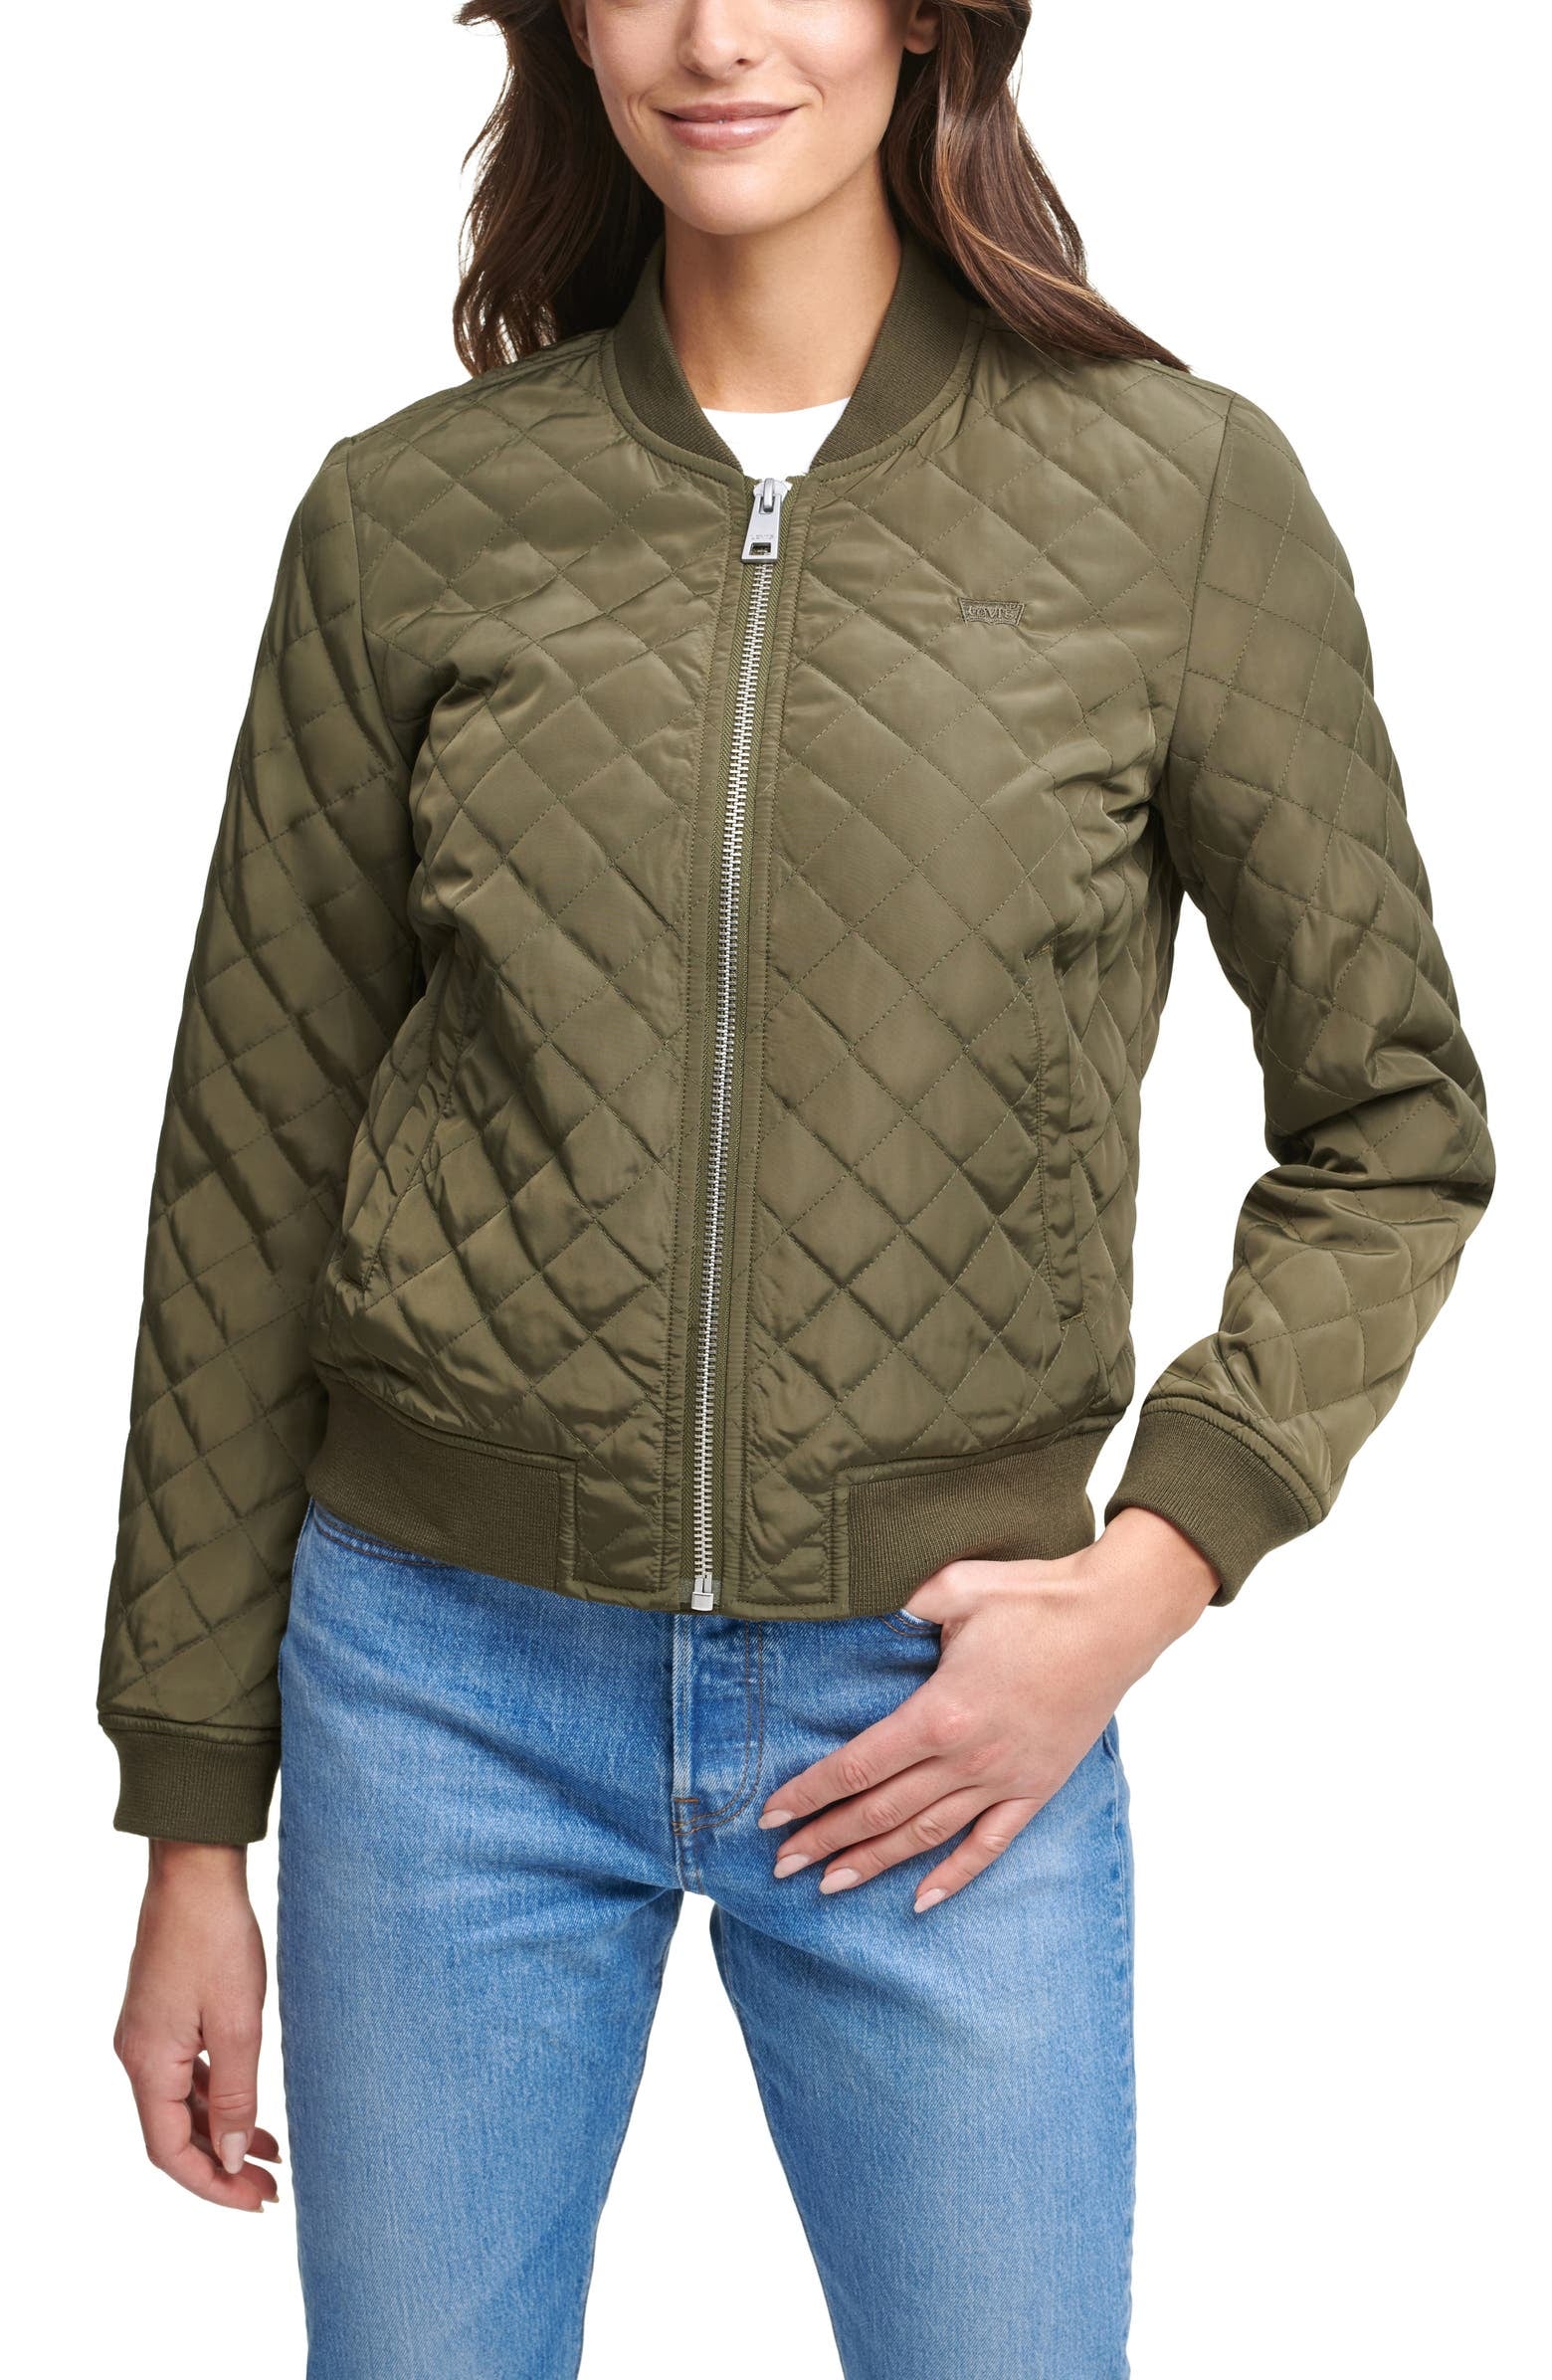 A Bomber Jacket: Levi's Quilted Bomber Jacket | Coat Season Is Upon Us —  Get Ready With These 16 Picks From Nordstrom Rack | POPSUGAR Fashion Photo 5